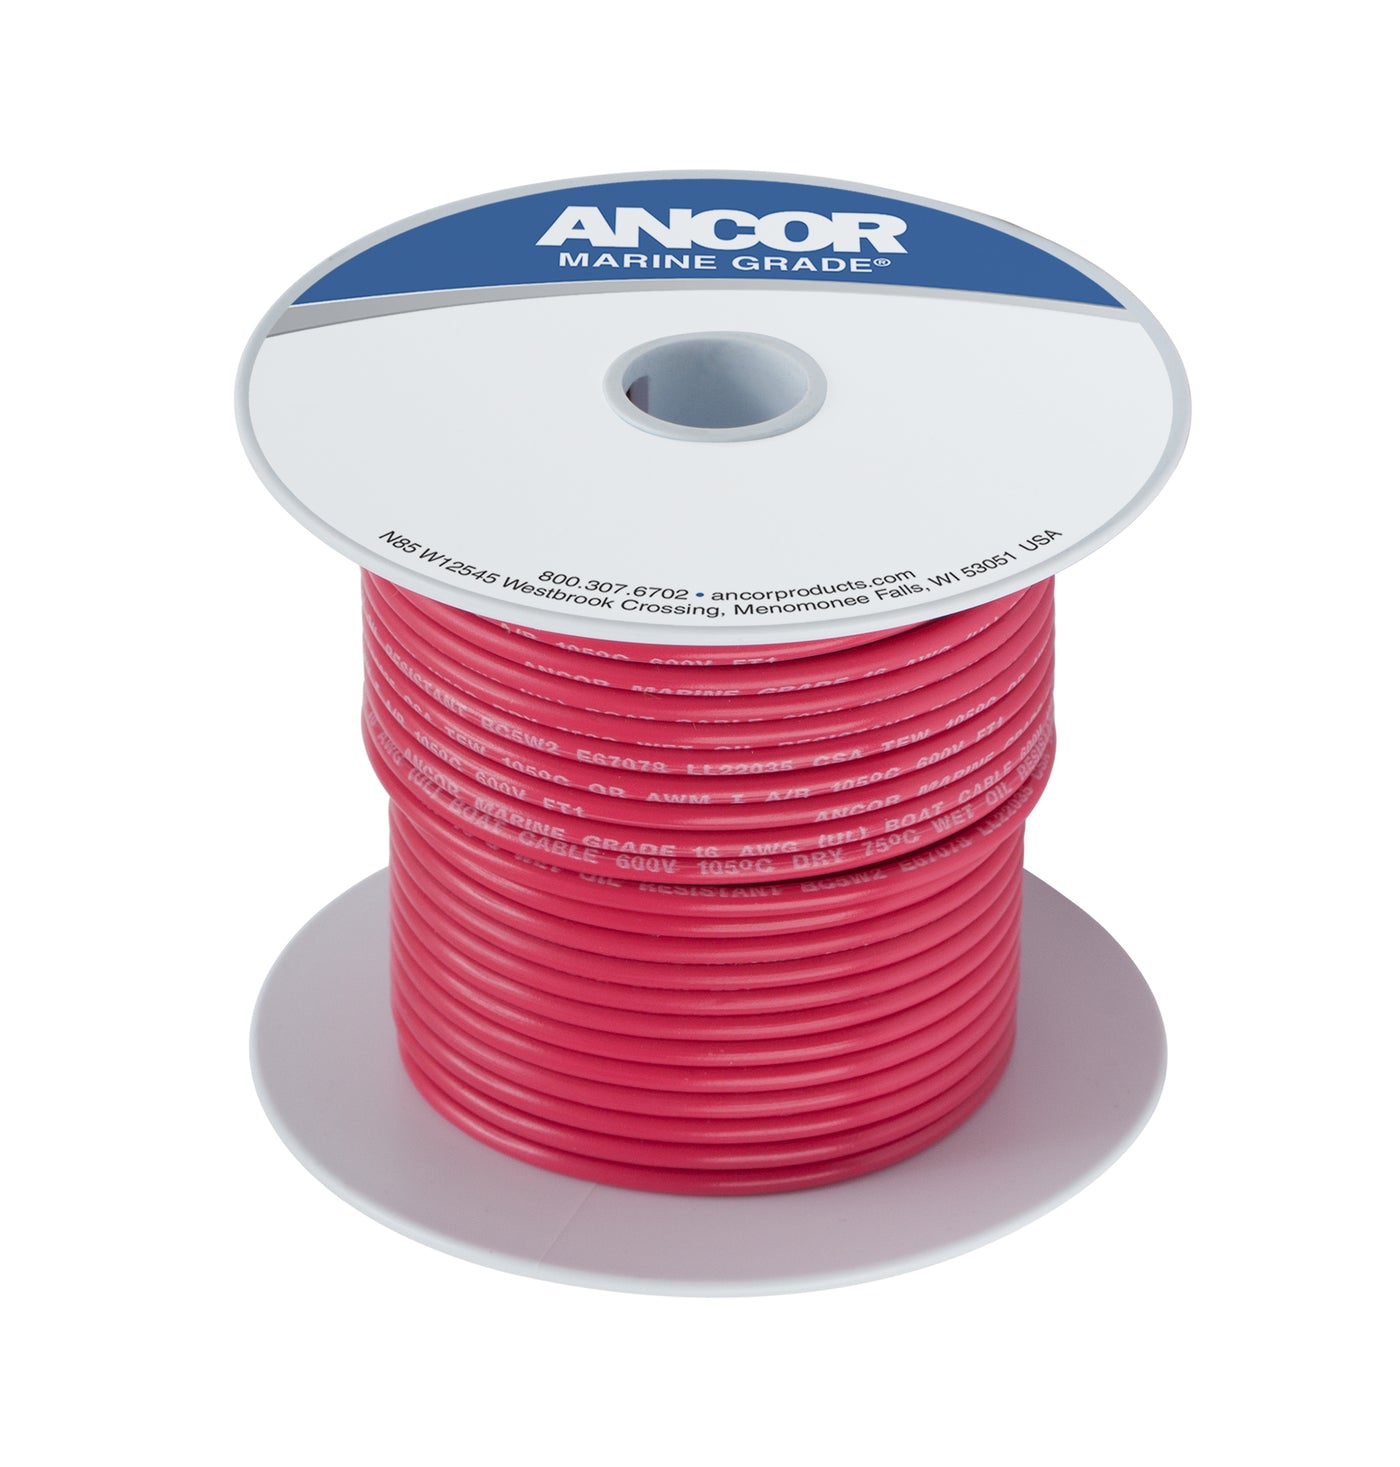 Ancor 111525 Tinned Copper Wire, 8 AWG (8mm²), Red - 250ft